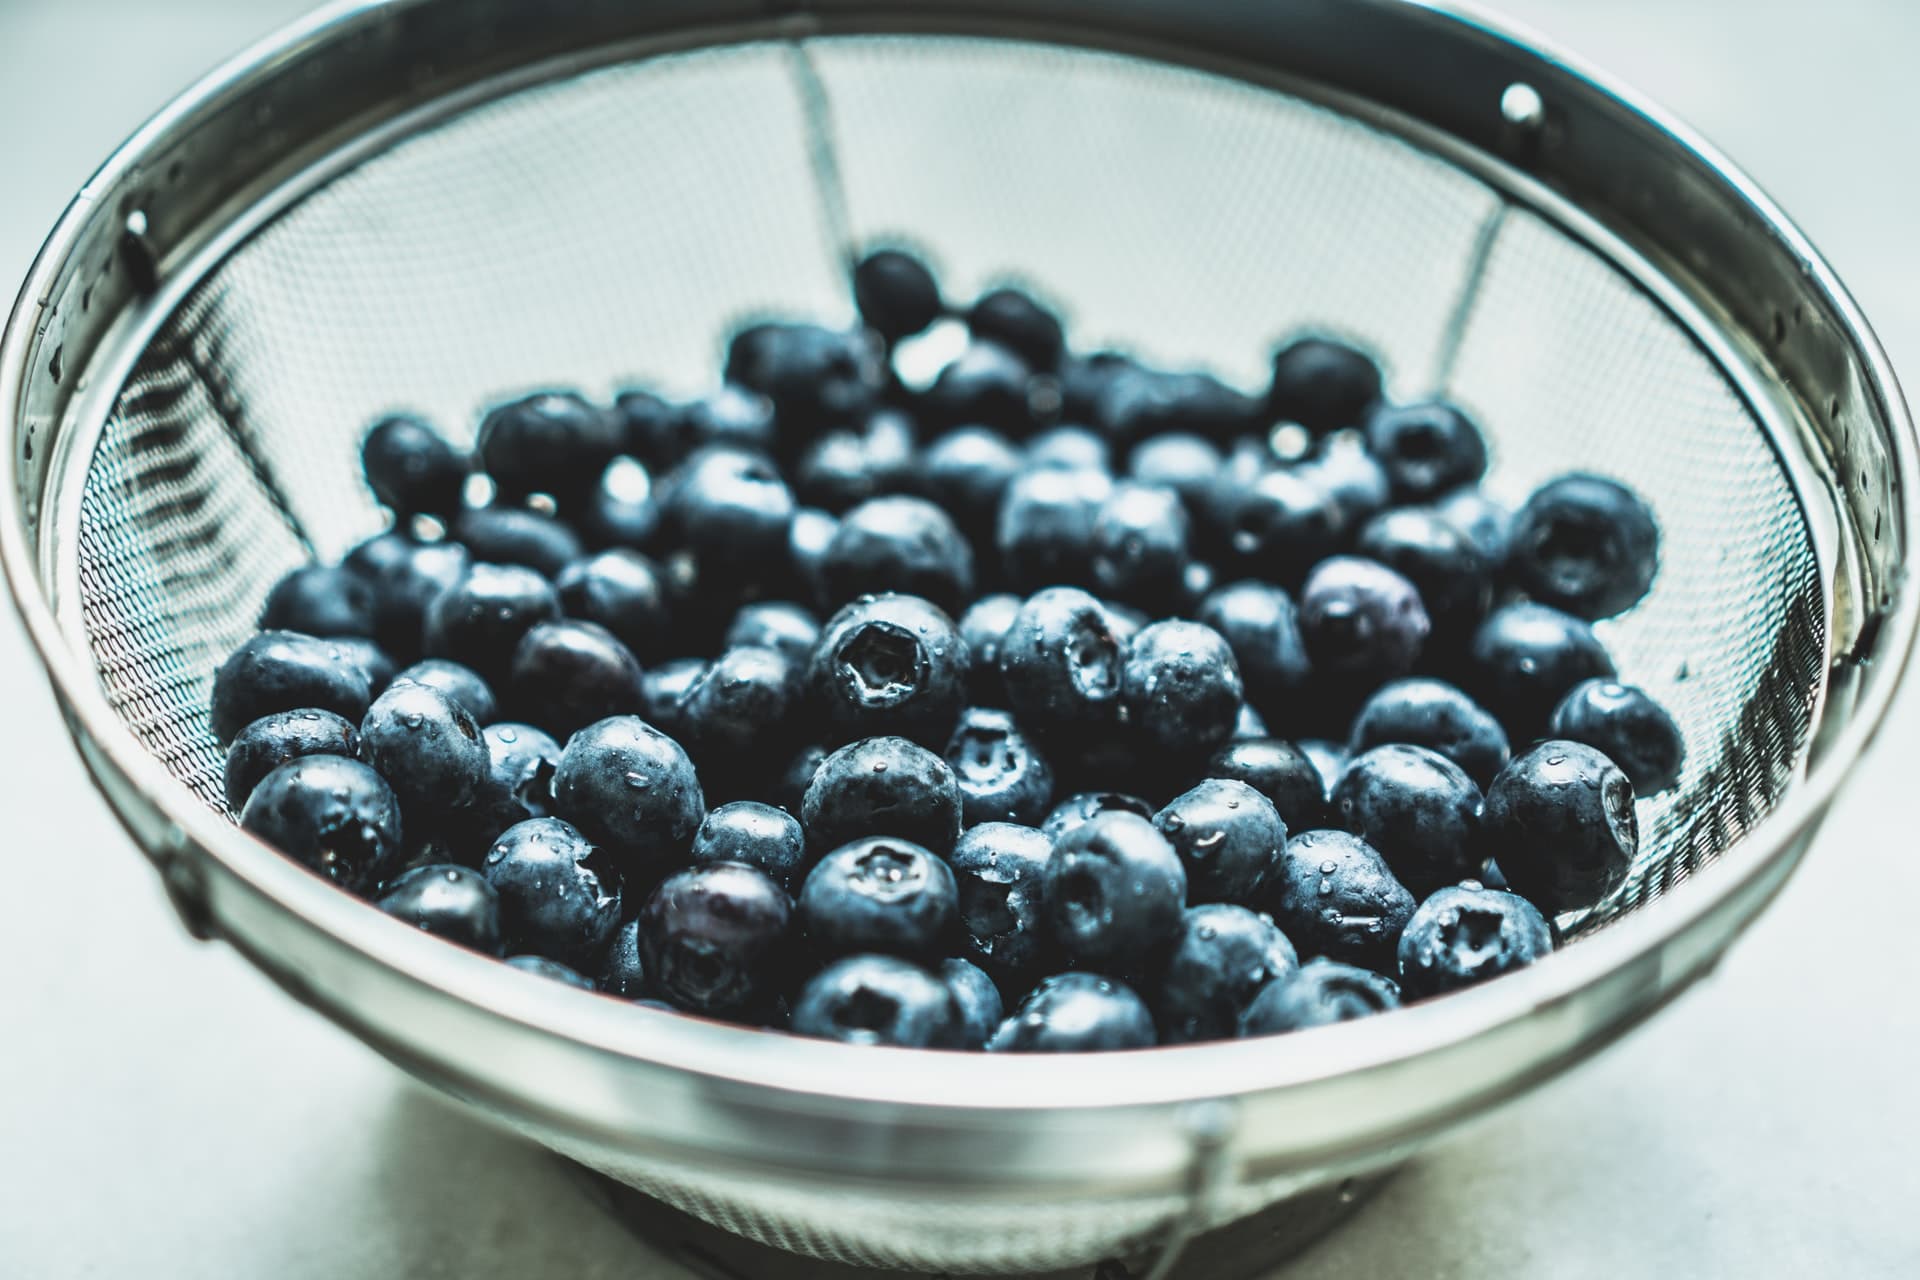 Why add dried blueberries in your diet?